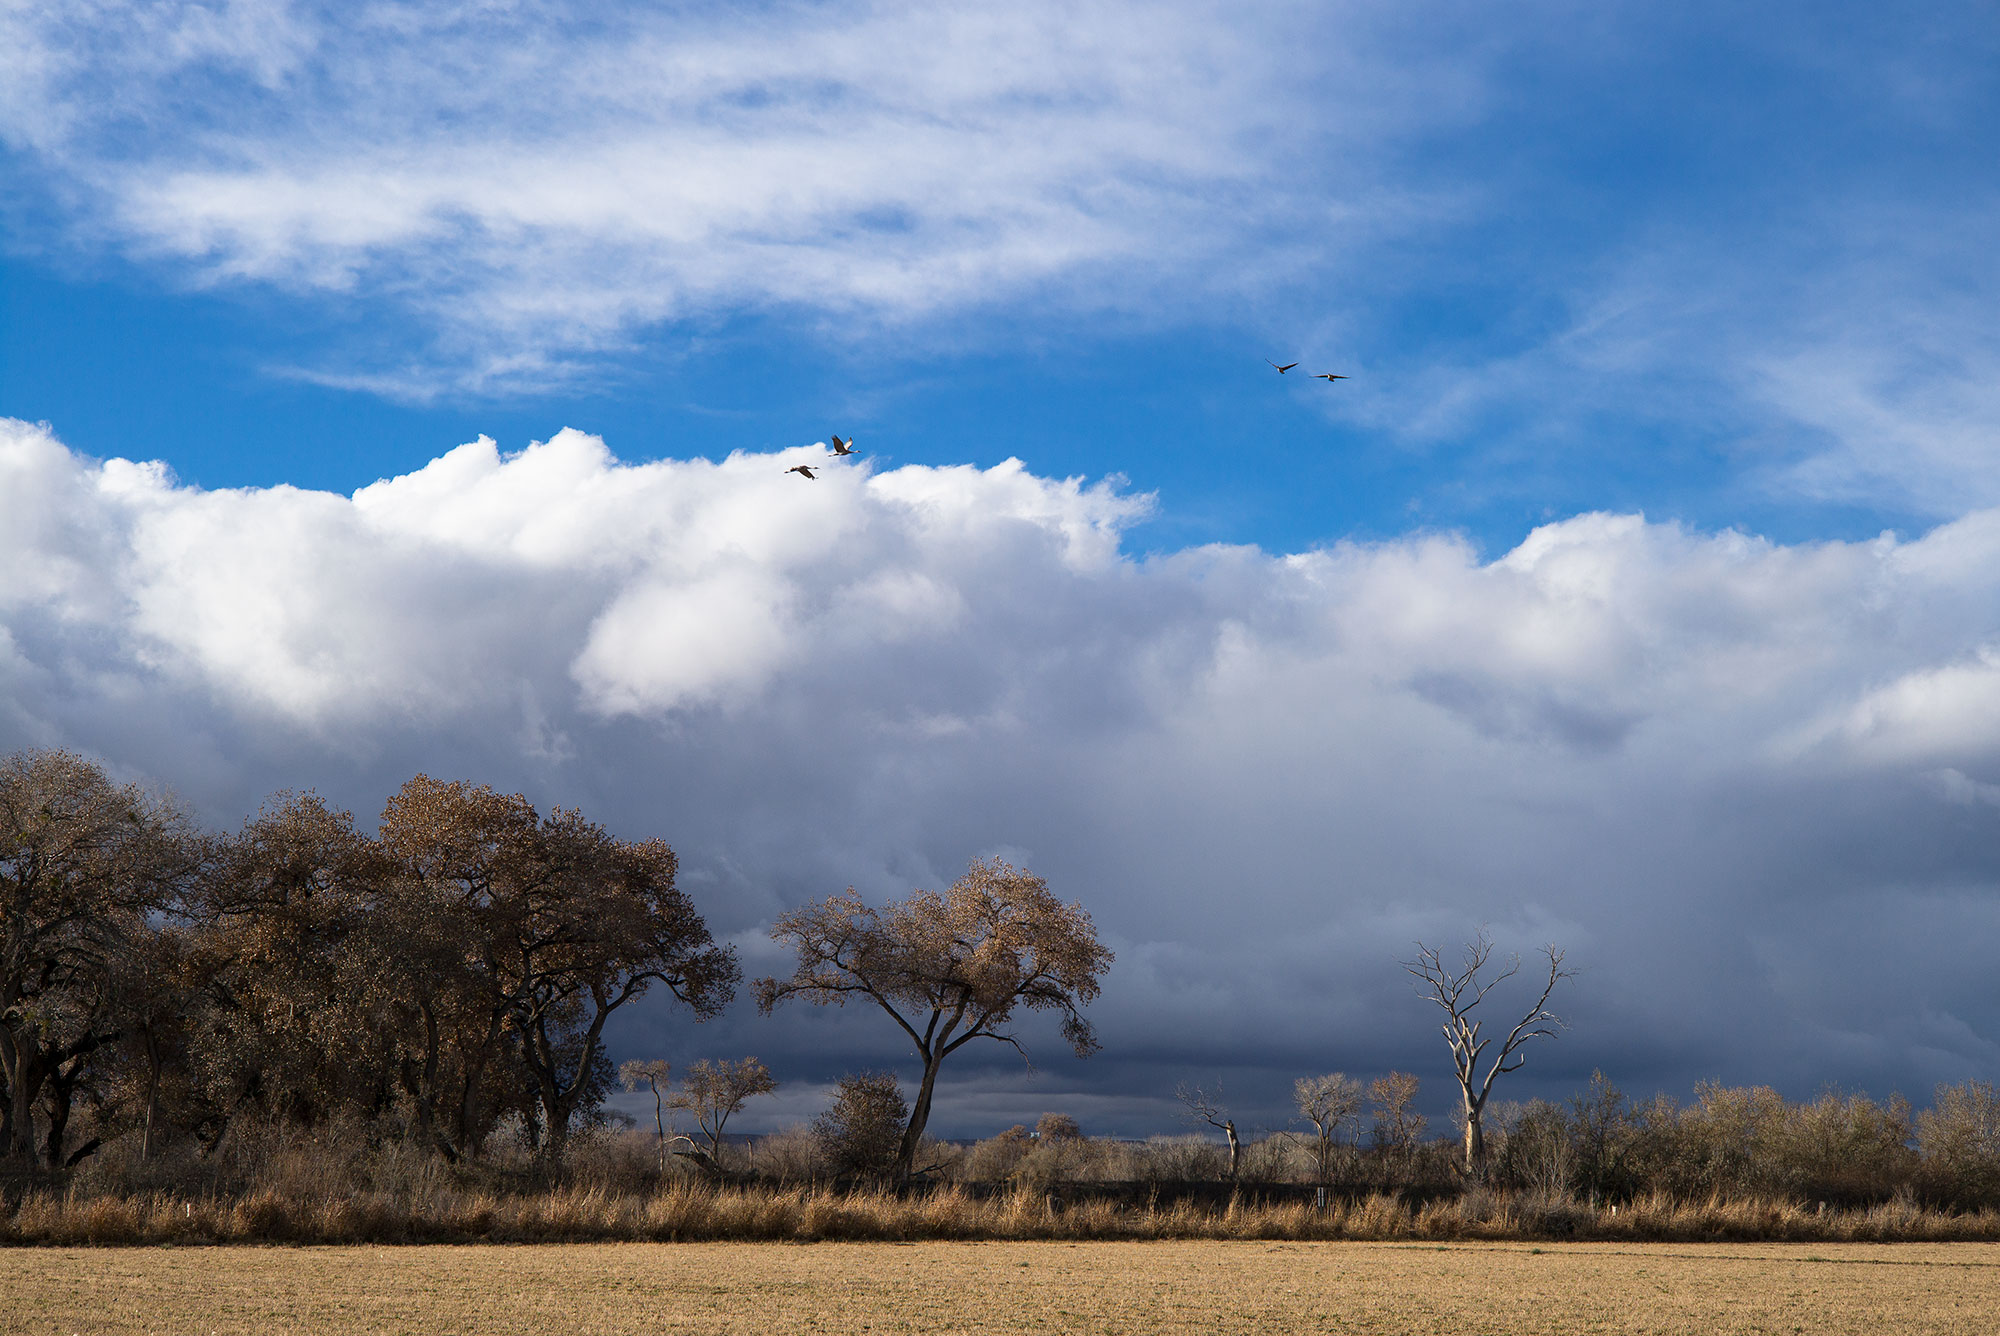 A cloudy sky with birds flying over a field.